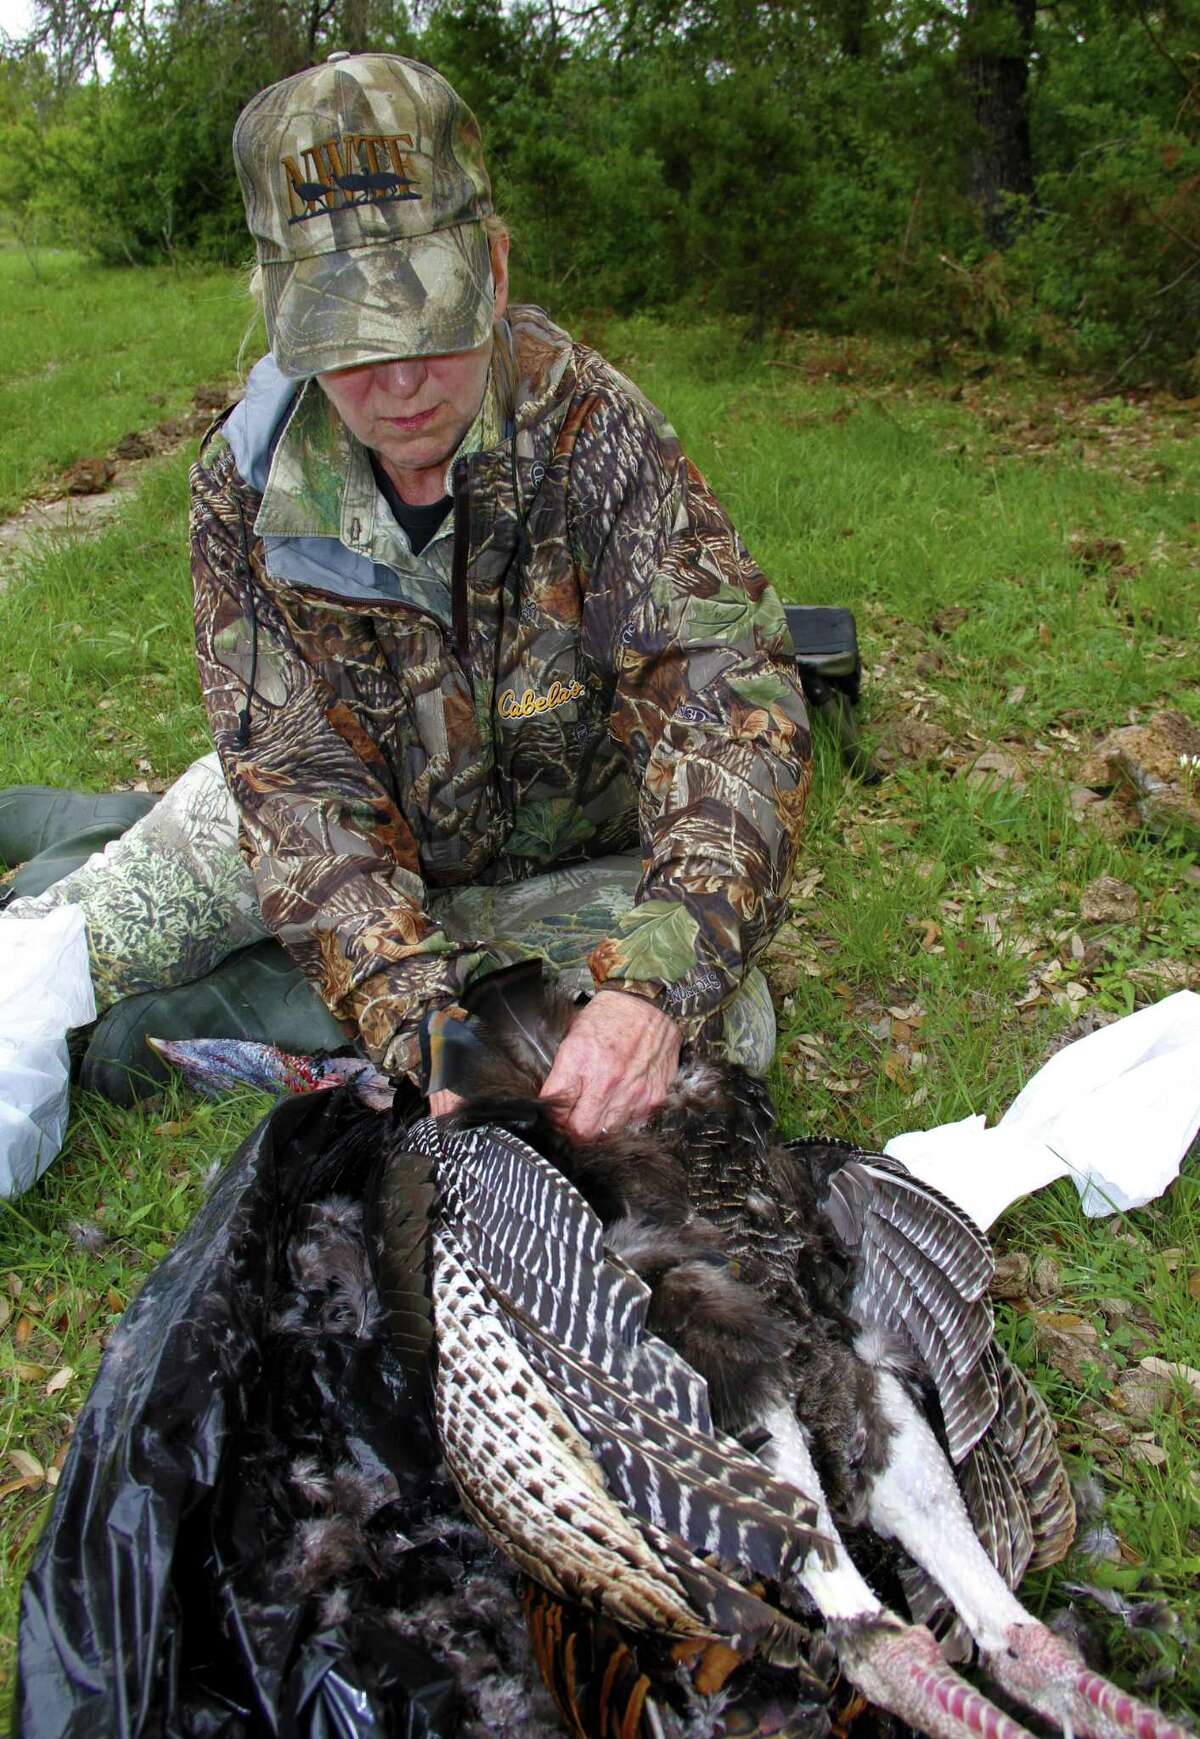 Successful Texas turkey hunters can aid research aimed at improving understanding of Rio Grande turkeys' population structure, habitat use and other traits by donating a handful of breast feathers to be used to build a DNA profile of the turkey subspecies across the state.